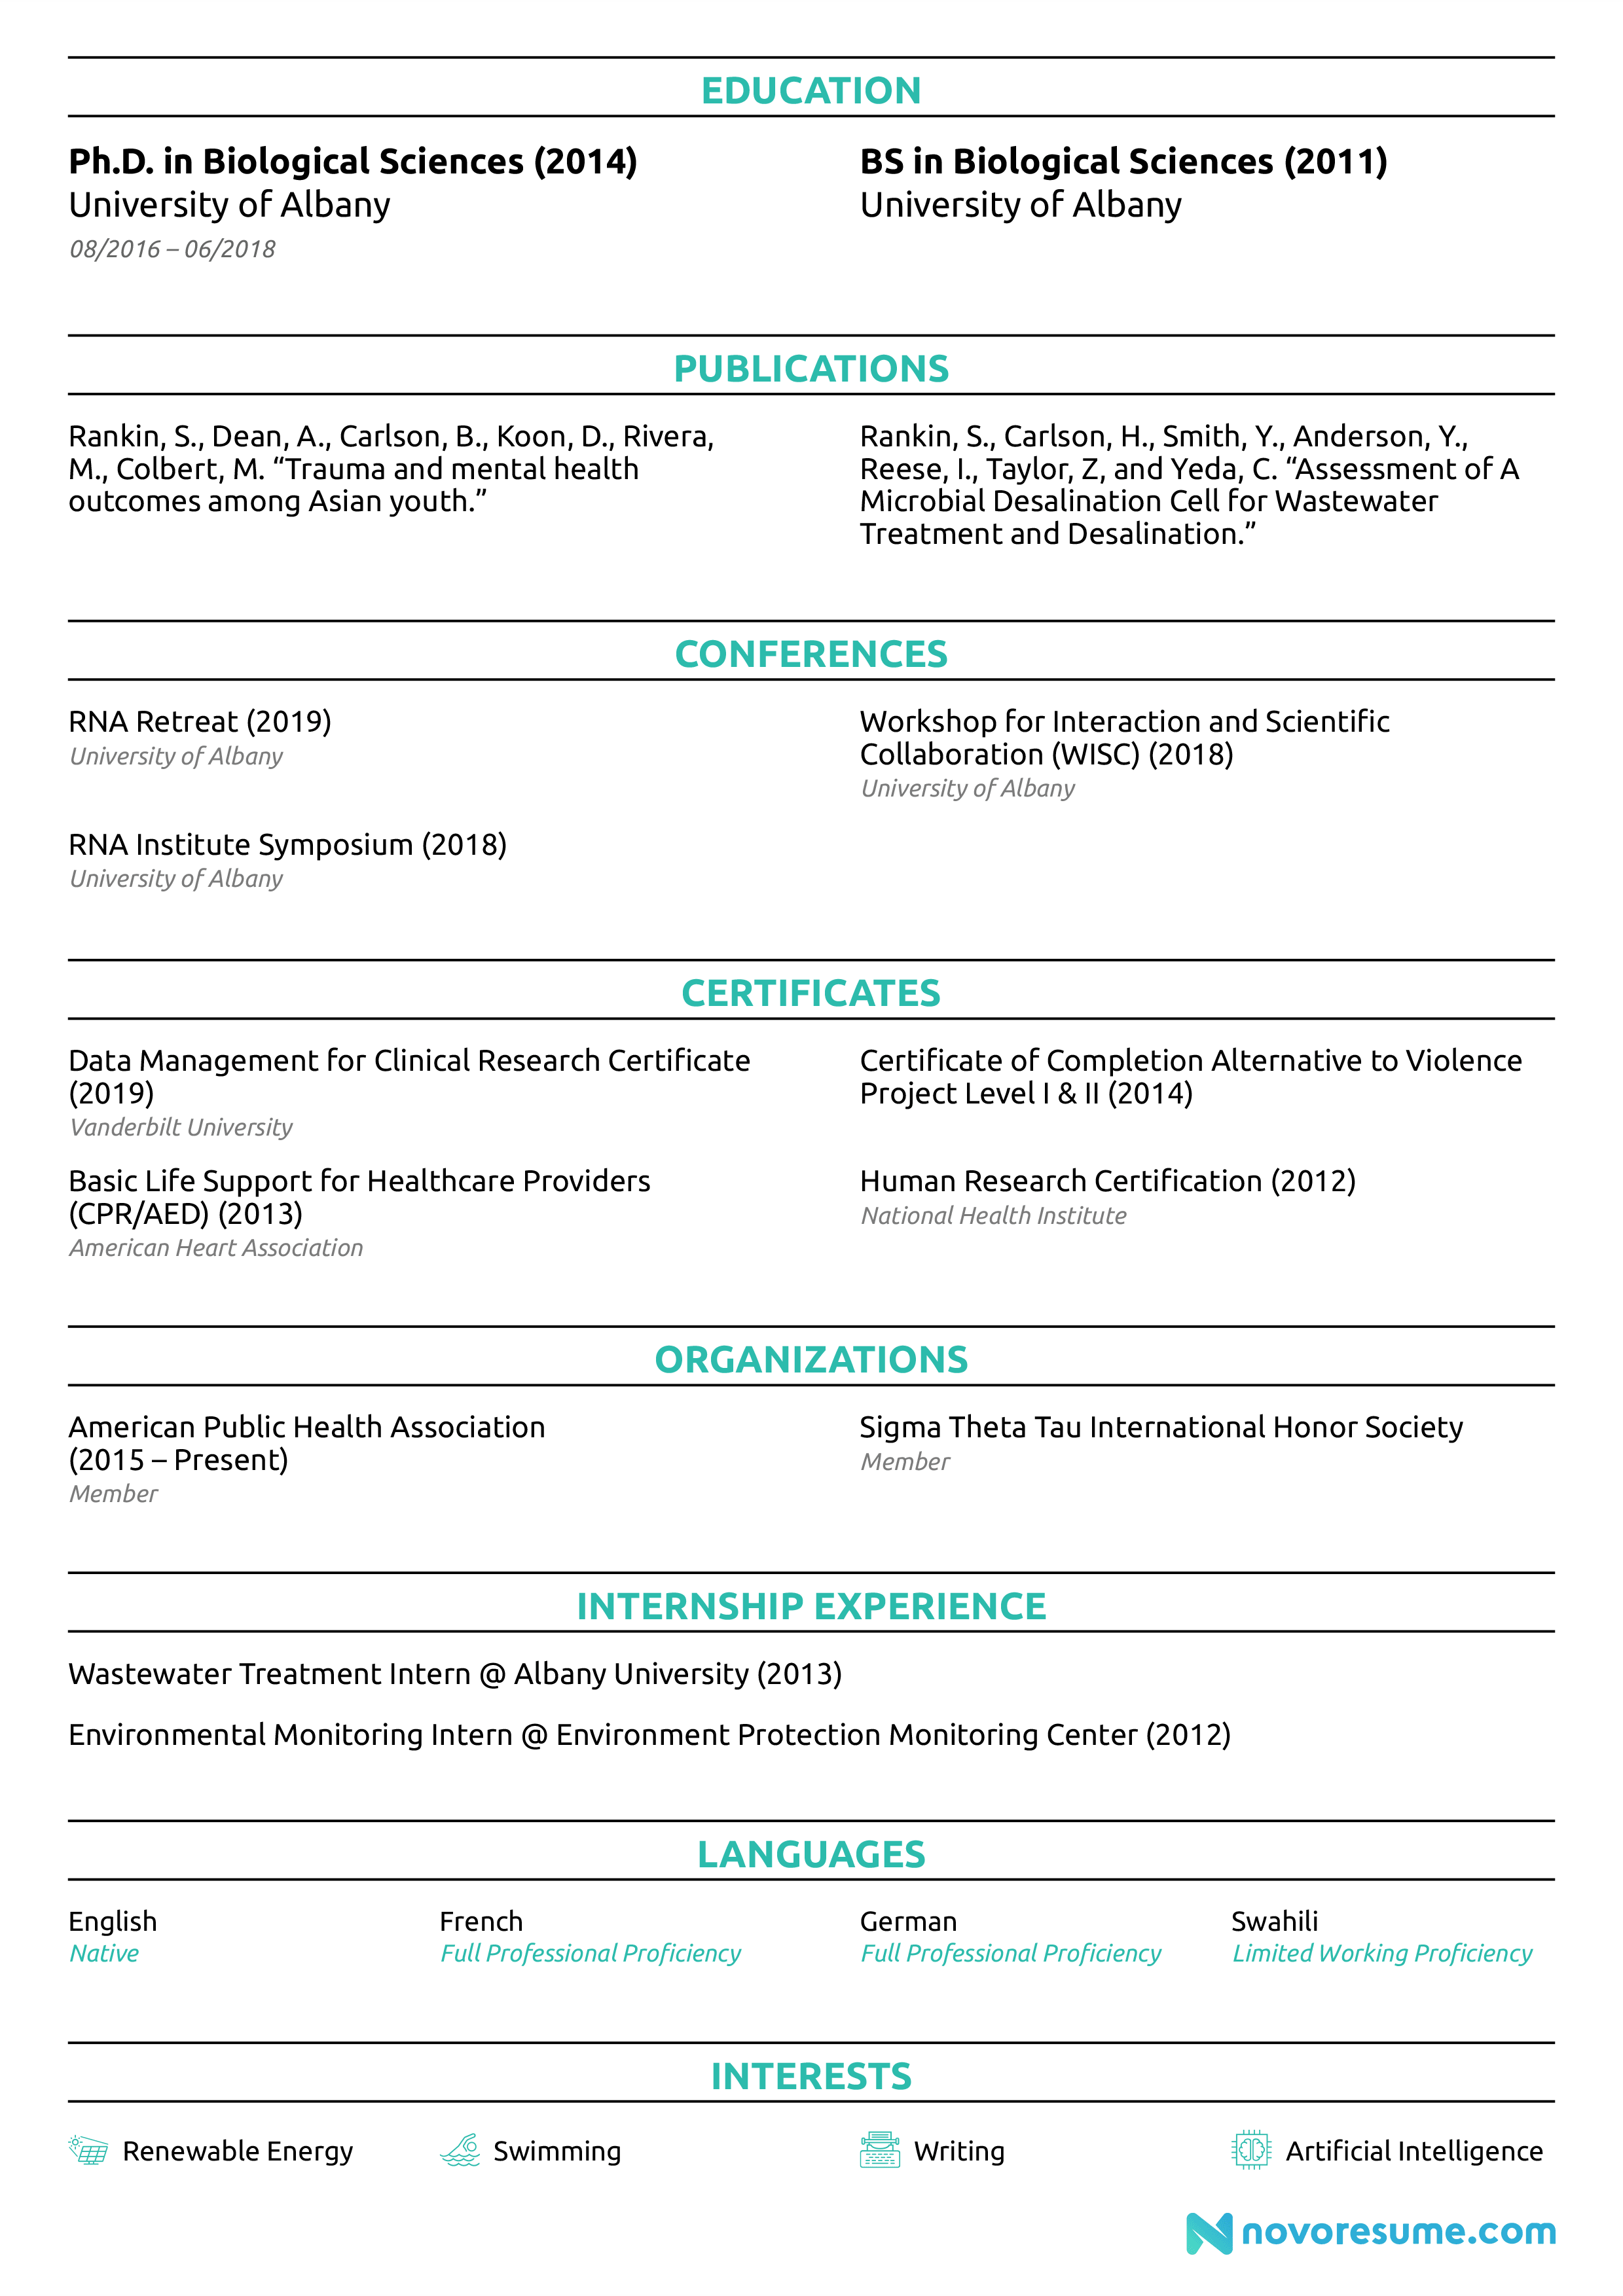 Research Assistant resume example page 2